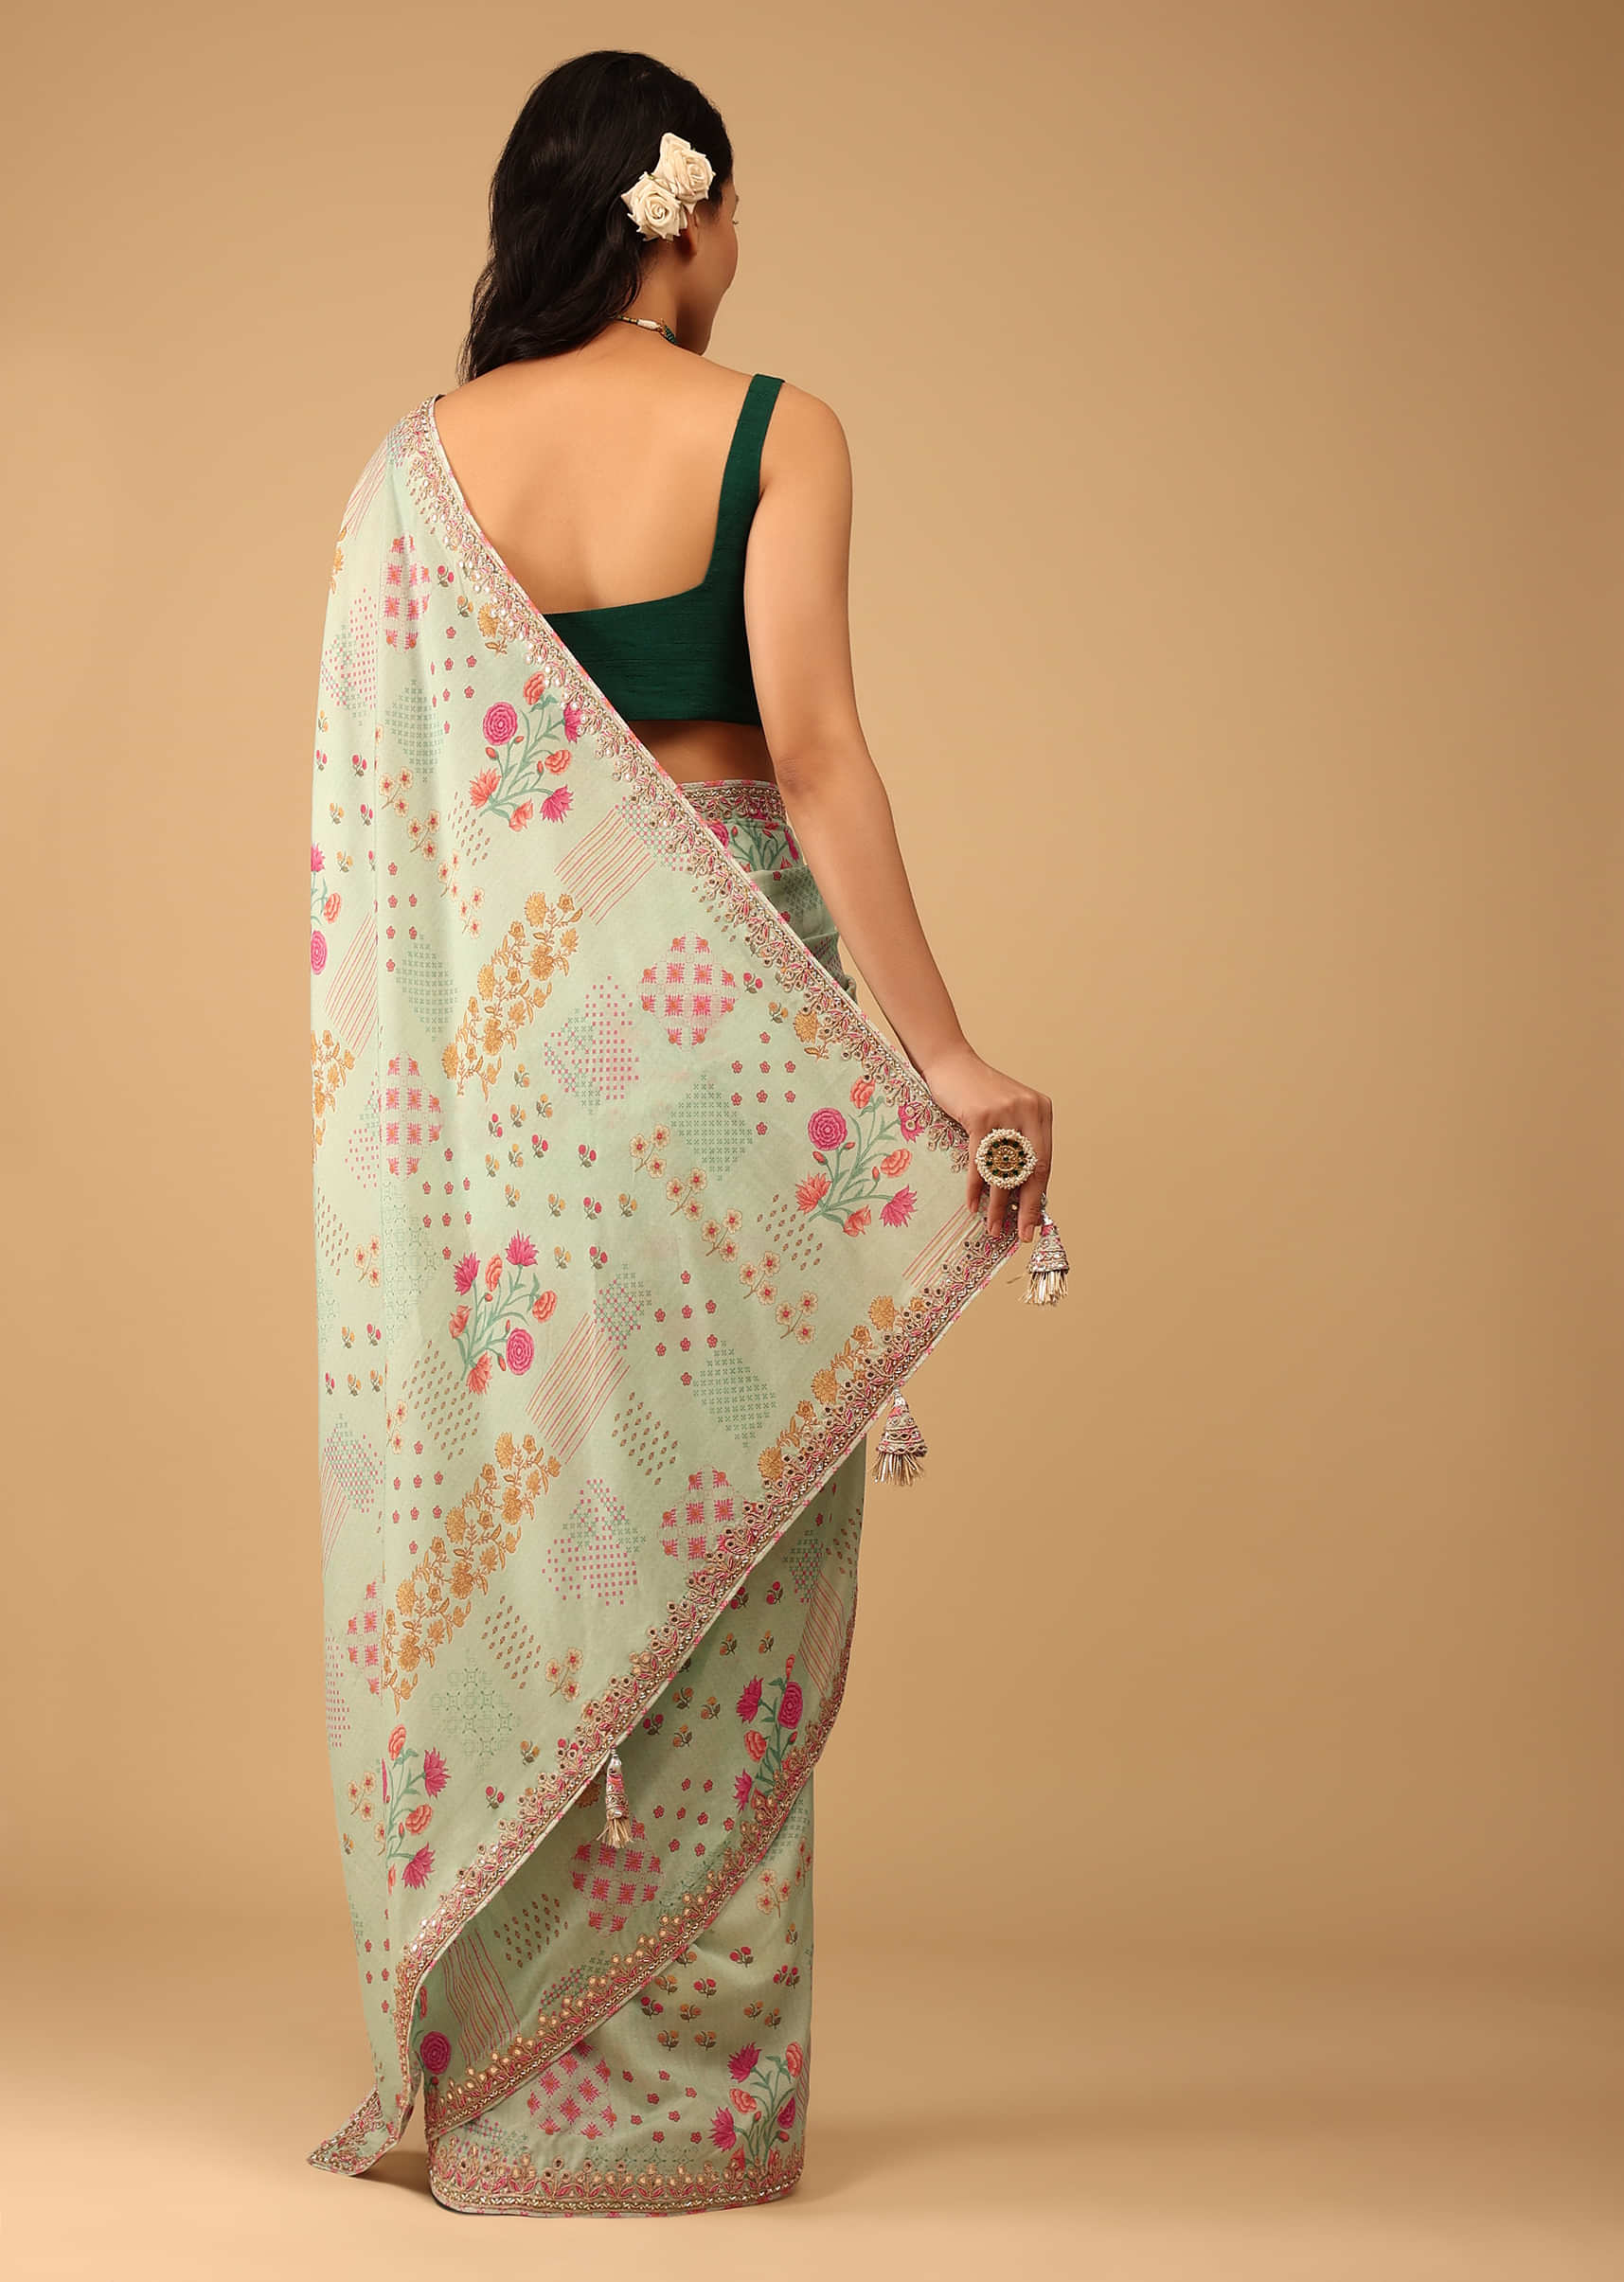 Powder Green Saree In Muslin With Floral Handblock Print And Embroidery